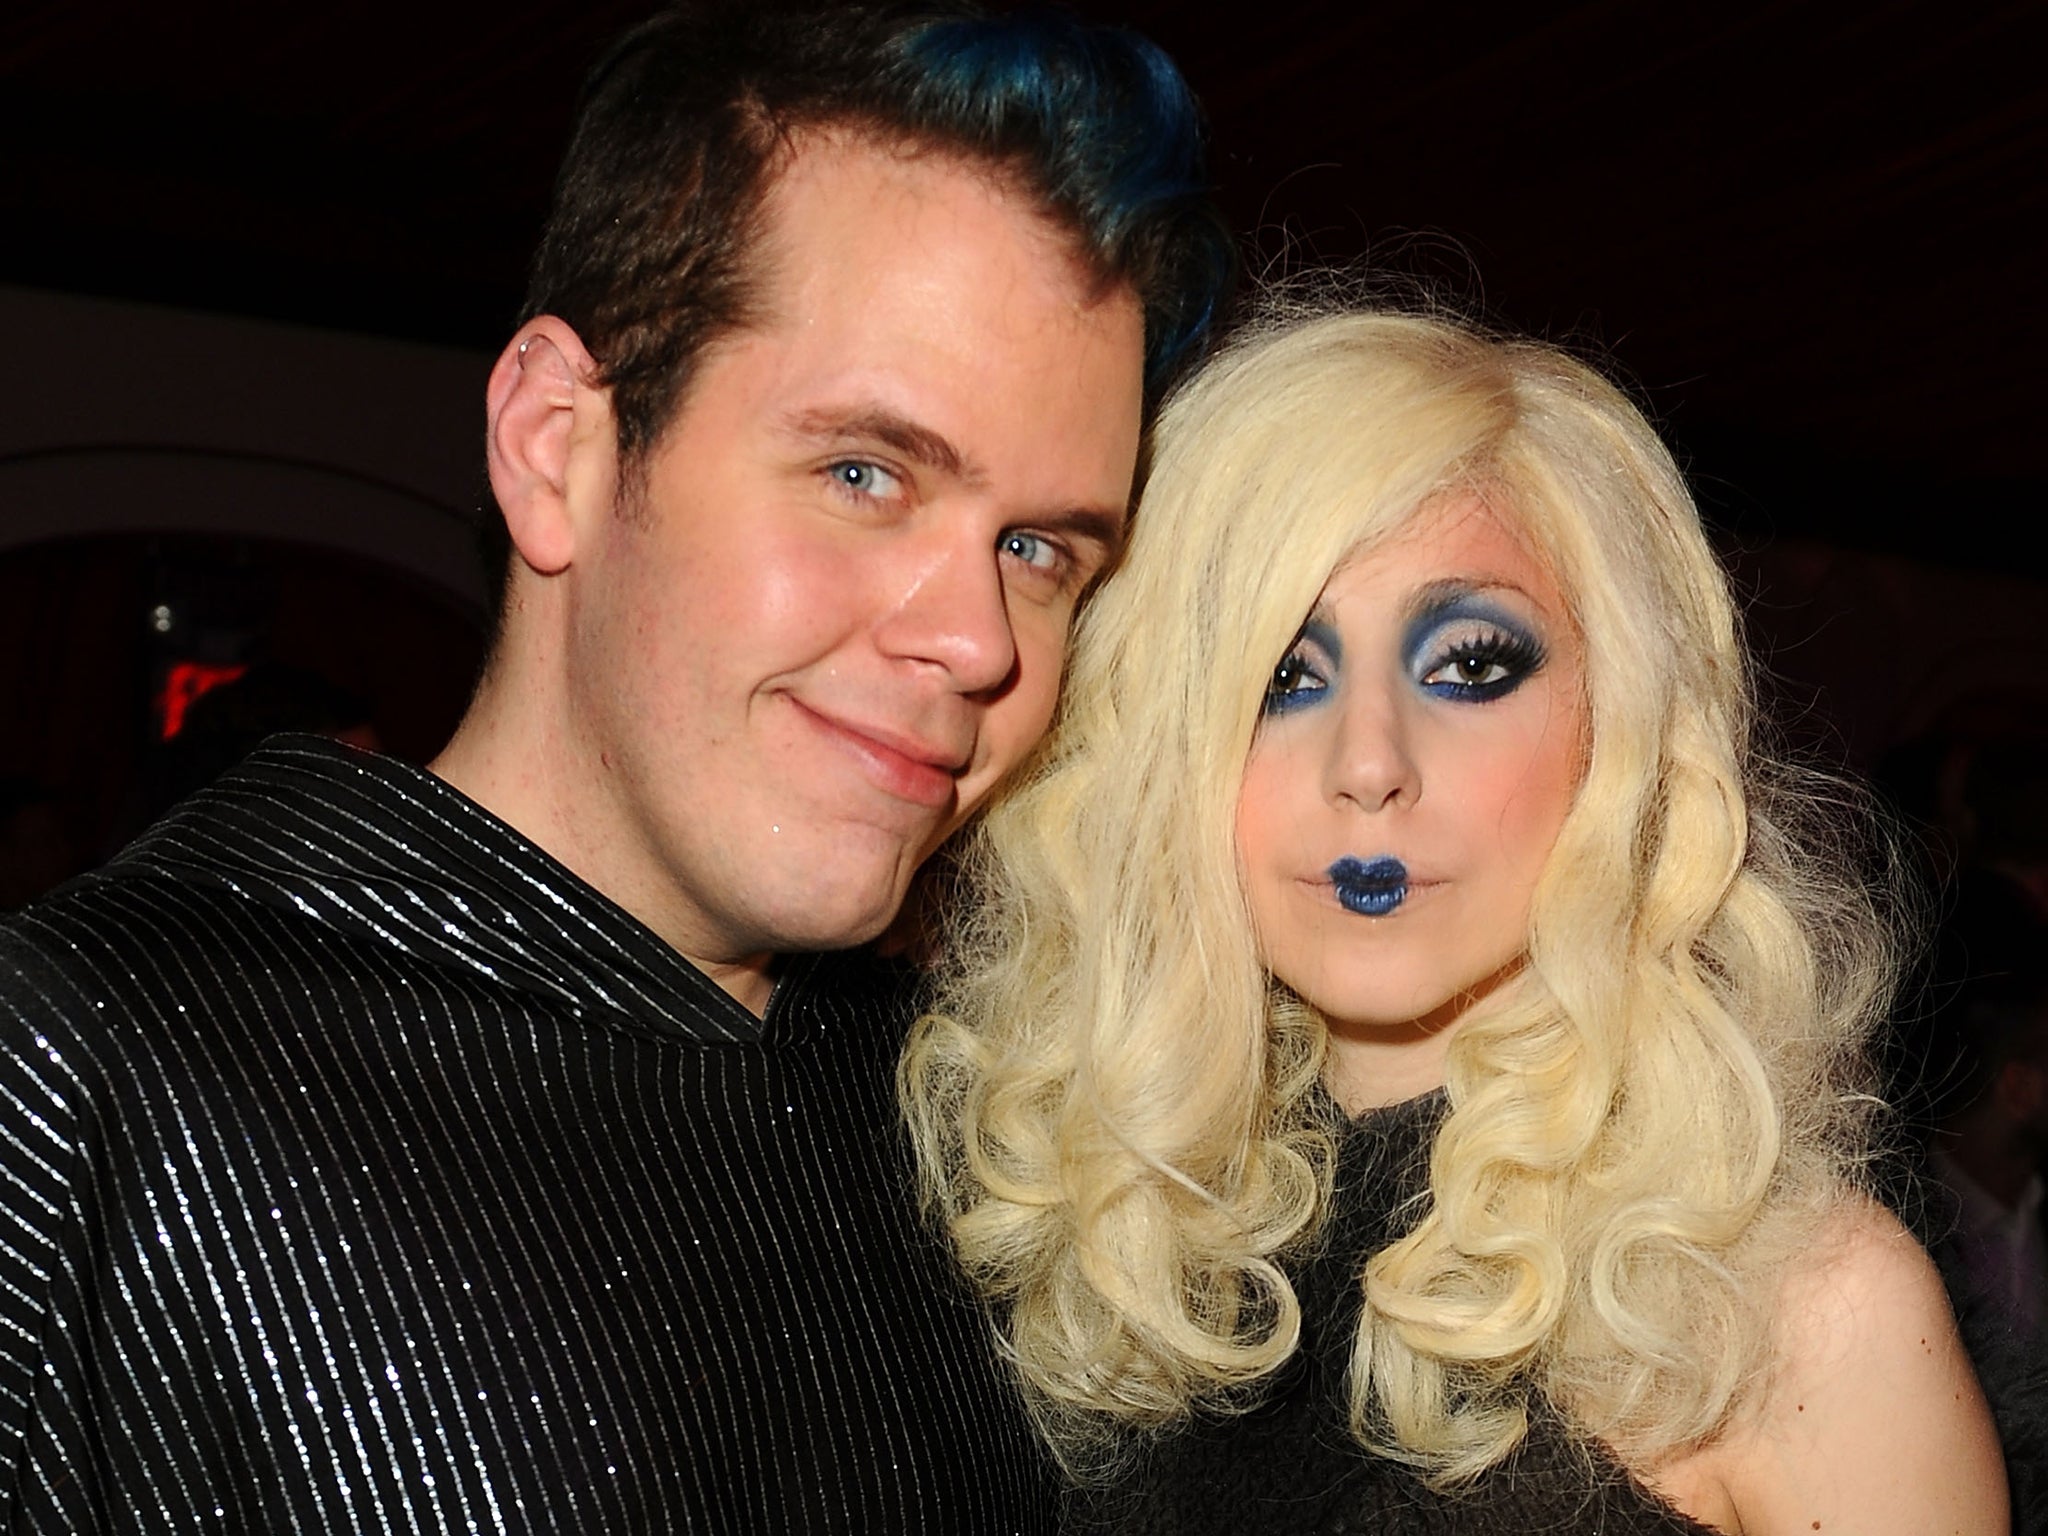 Perez Hilton Alleges Lady Gaga ‘used Him’ To Write ‘terrible’ Things About Christina Aguilera On